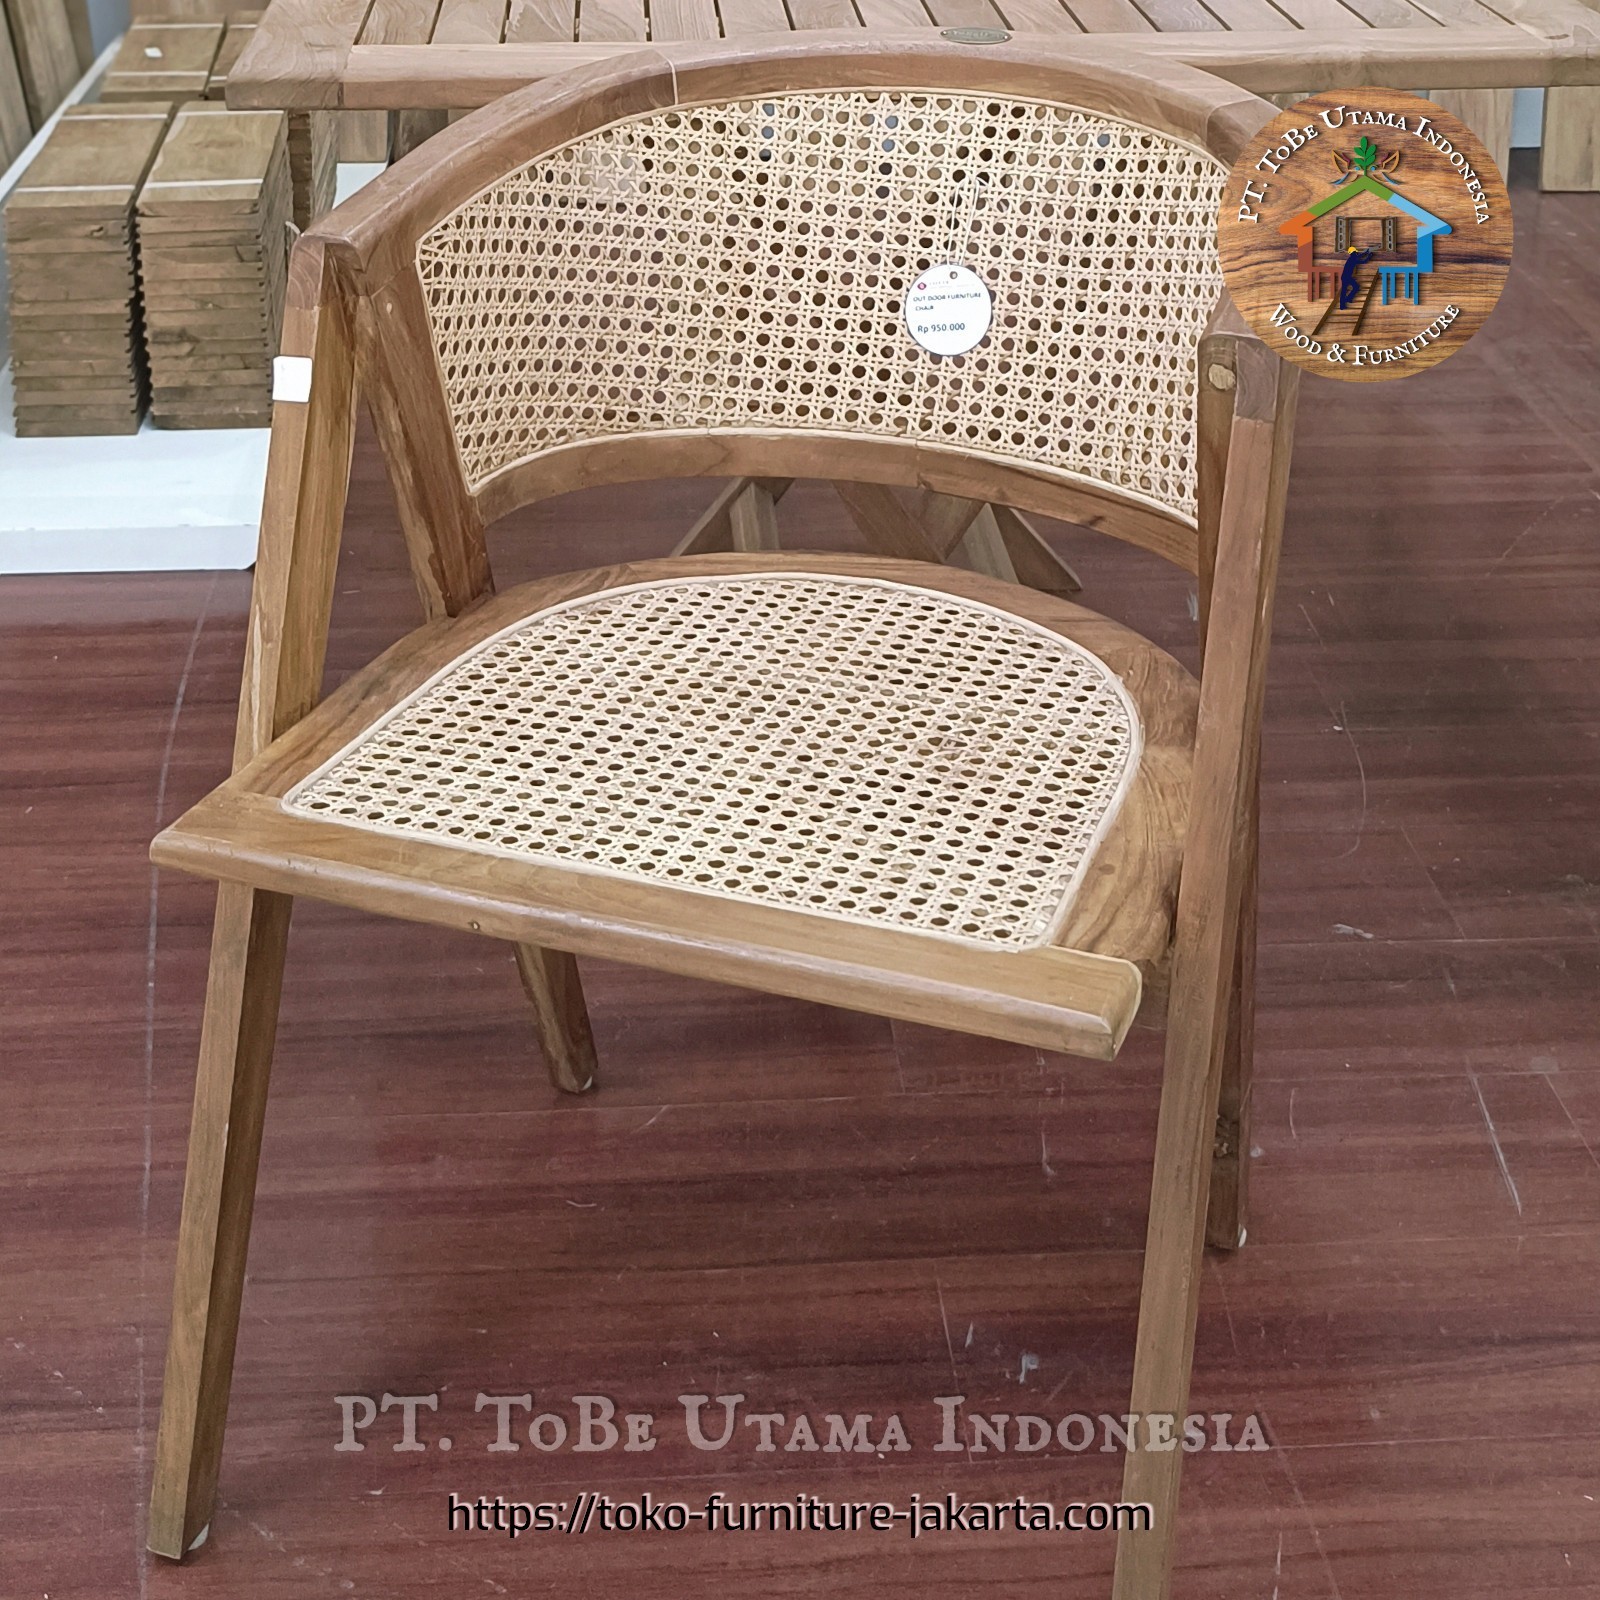 Living Room - Chairs: Rattan Dining Chair R made of teakwood, rattan (image 1 of 1).